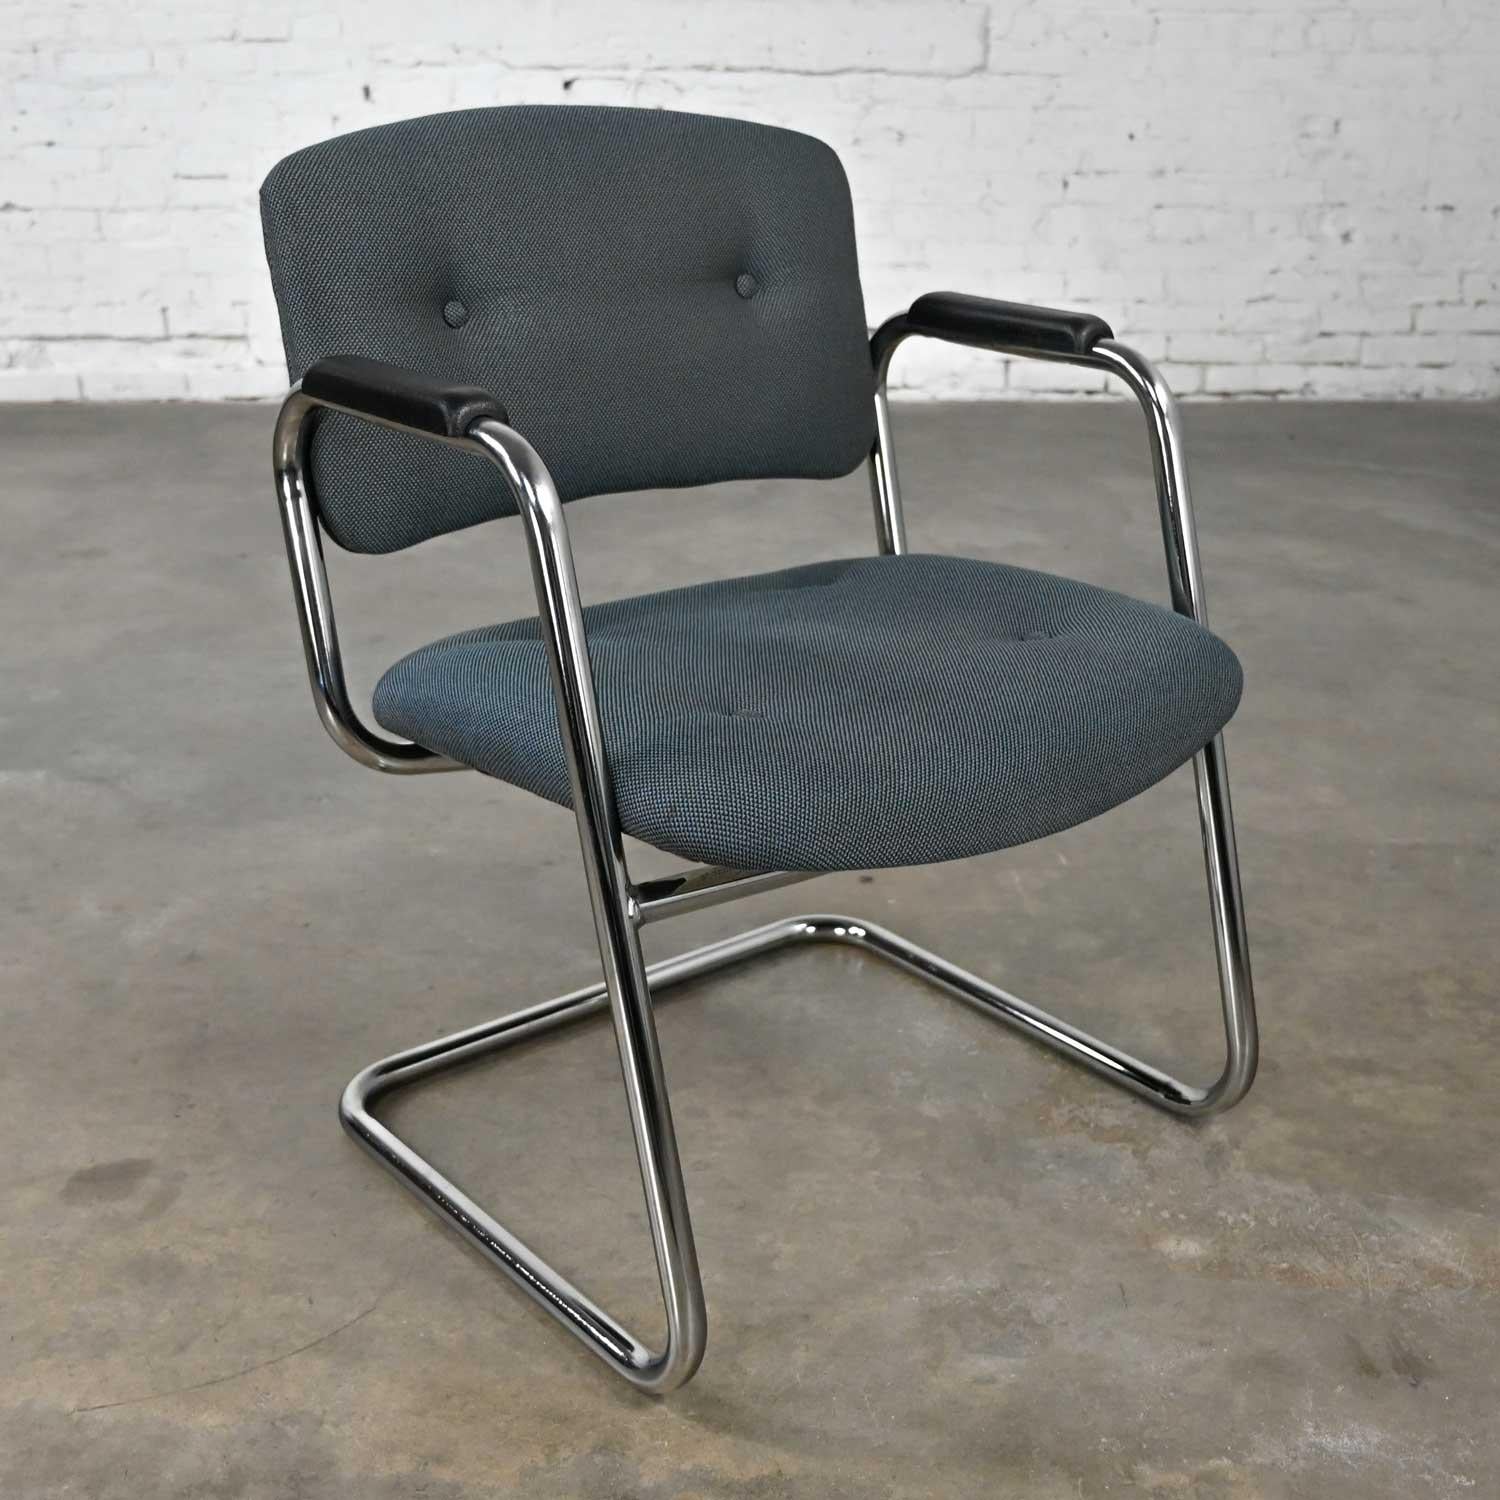 Vintage Chrome Cantilever Chairs United Chair Co Style Steelcase Sold Separately For Sale 4